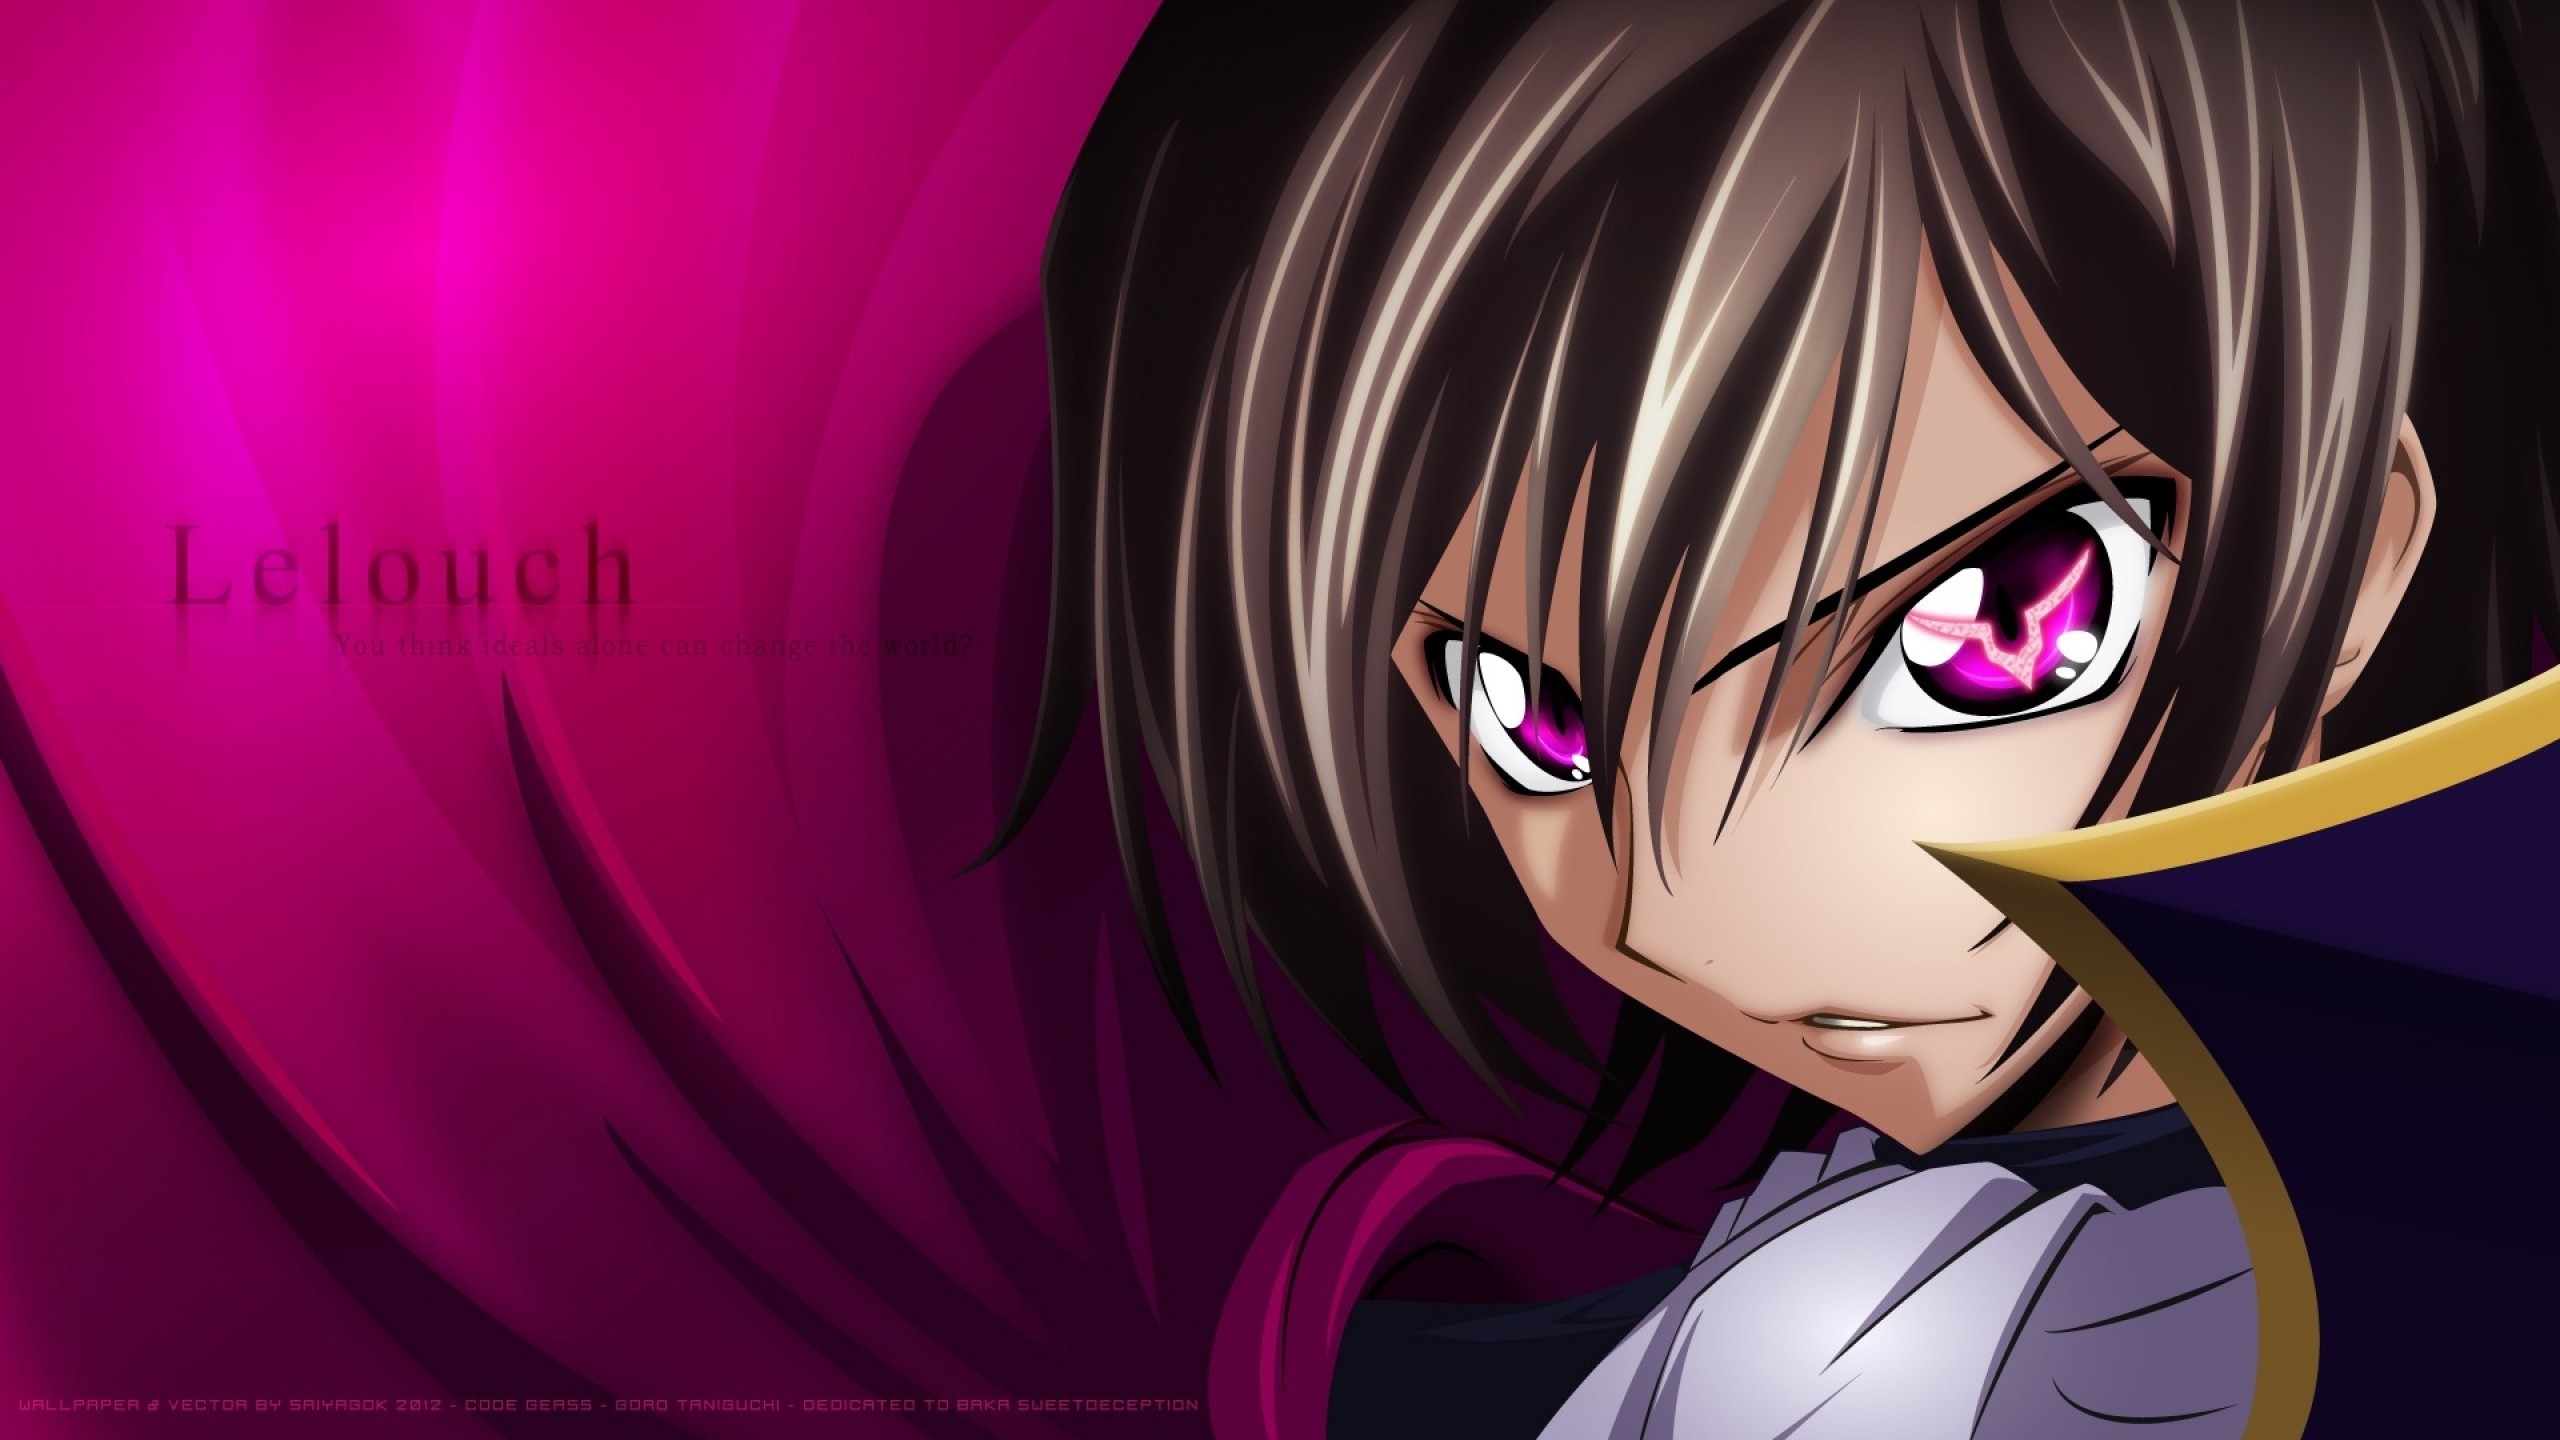 Code Geass Lelouch Lamperouge Anime Wallpaper Hd Anime 4k Wallpapers Images Photos And Background Wallpapers Den